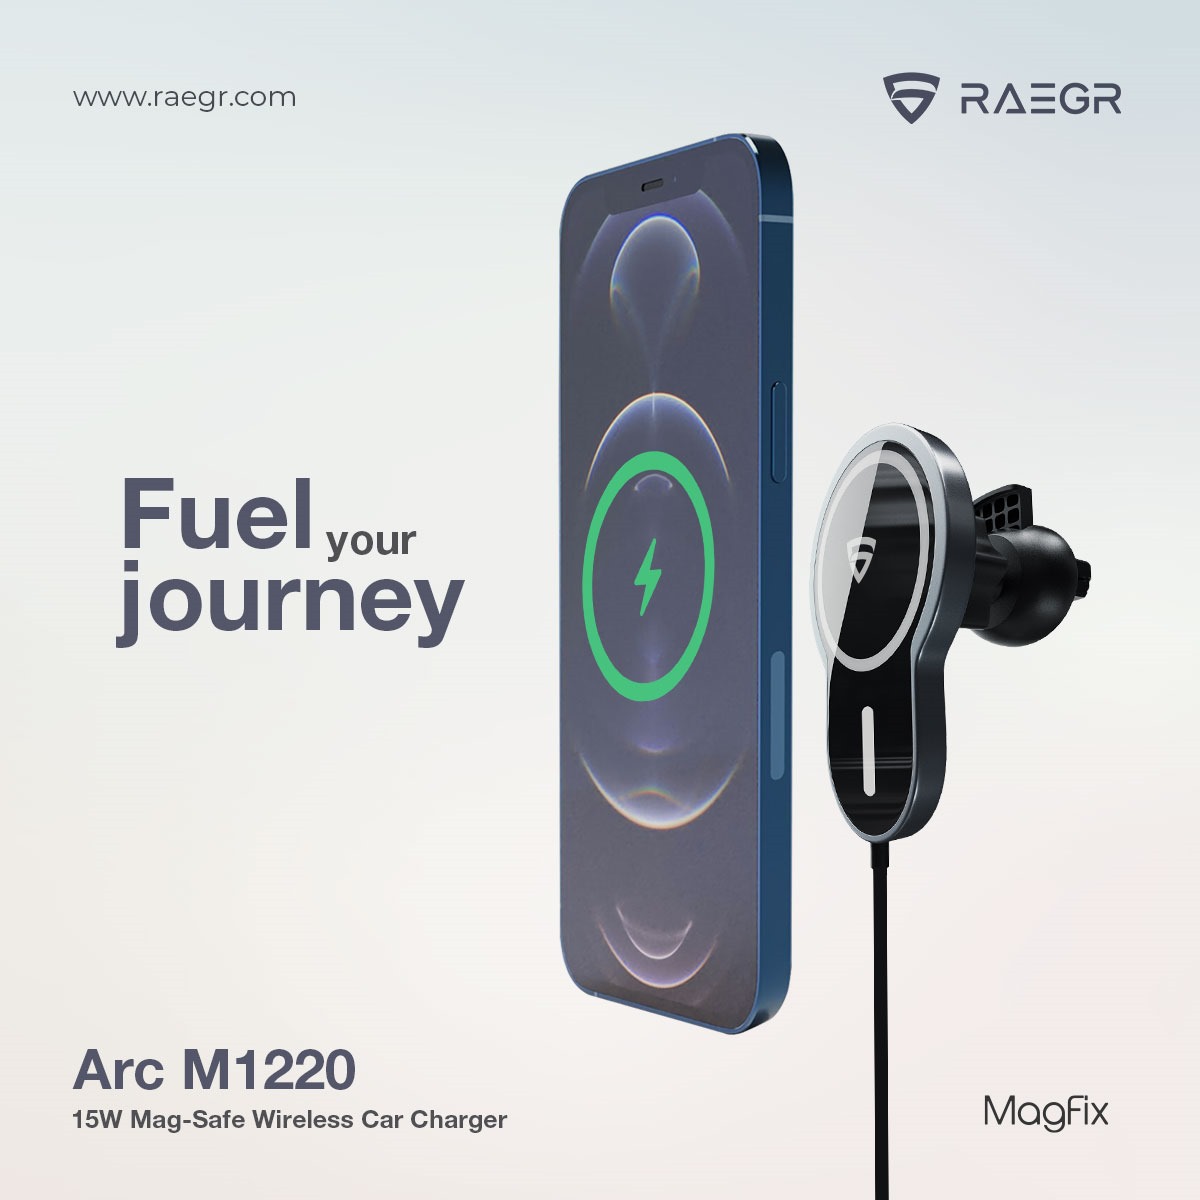 Keep your iPhone charged and ready for action even when you're busy driving to your new adventure with the RAEGR MagFix Arc M1220 15W Mag-Safe Wireless Car Charger. 

Buy Now!
Raegr:postly.app/3Sf4
Tekkitake:postly.app/3Sf6

#RAEGR #ArcM1220 #CarCharger